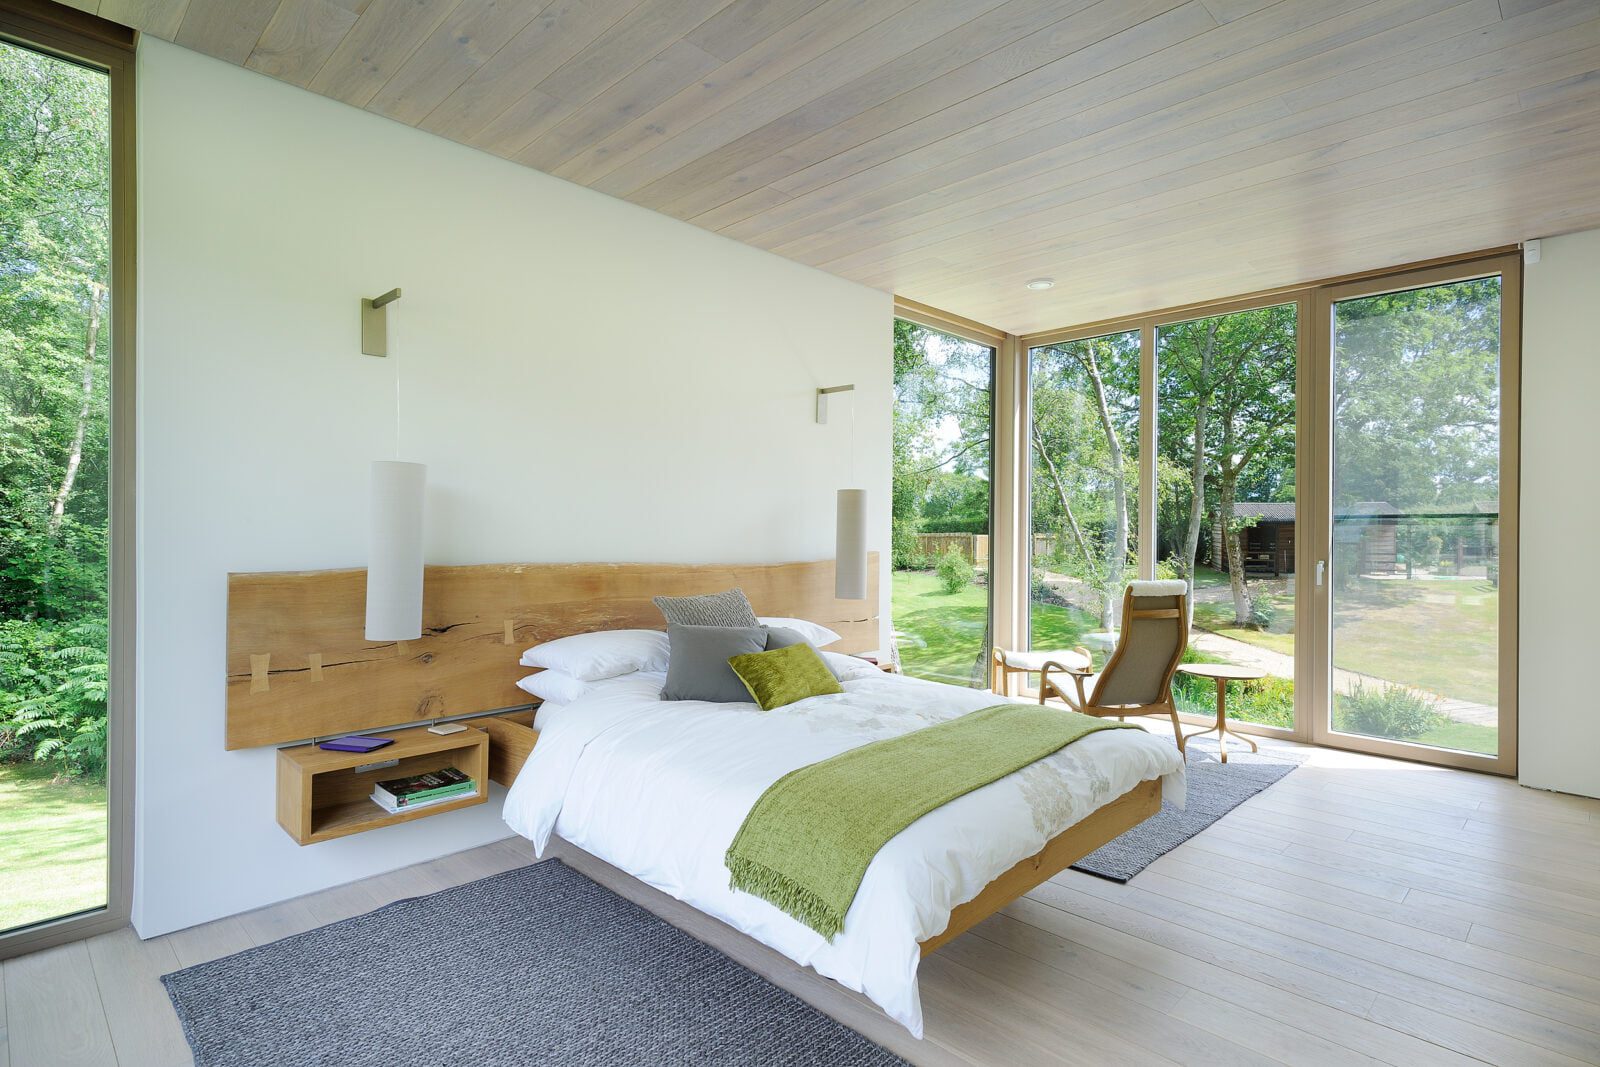 Floating bed with corner window connecting into the landscape